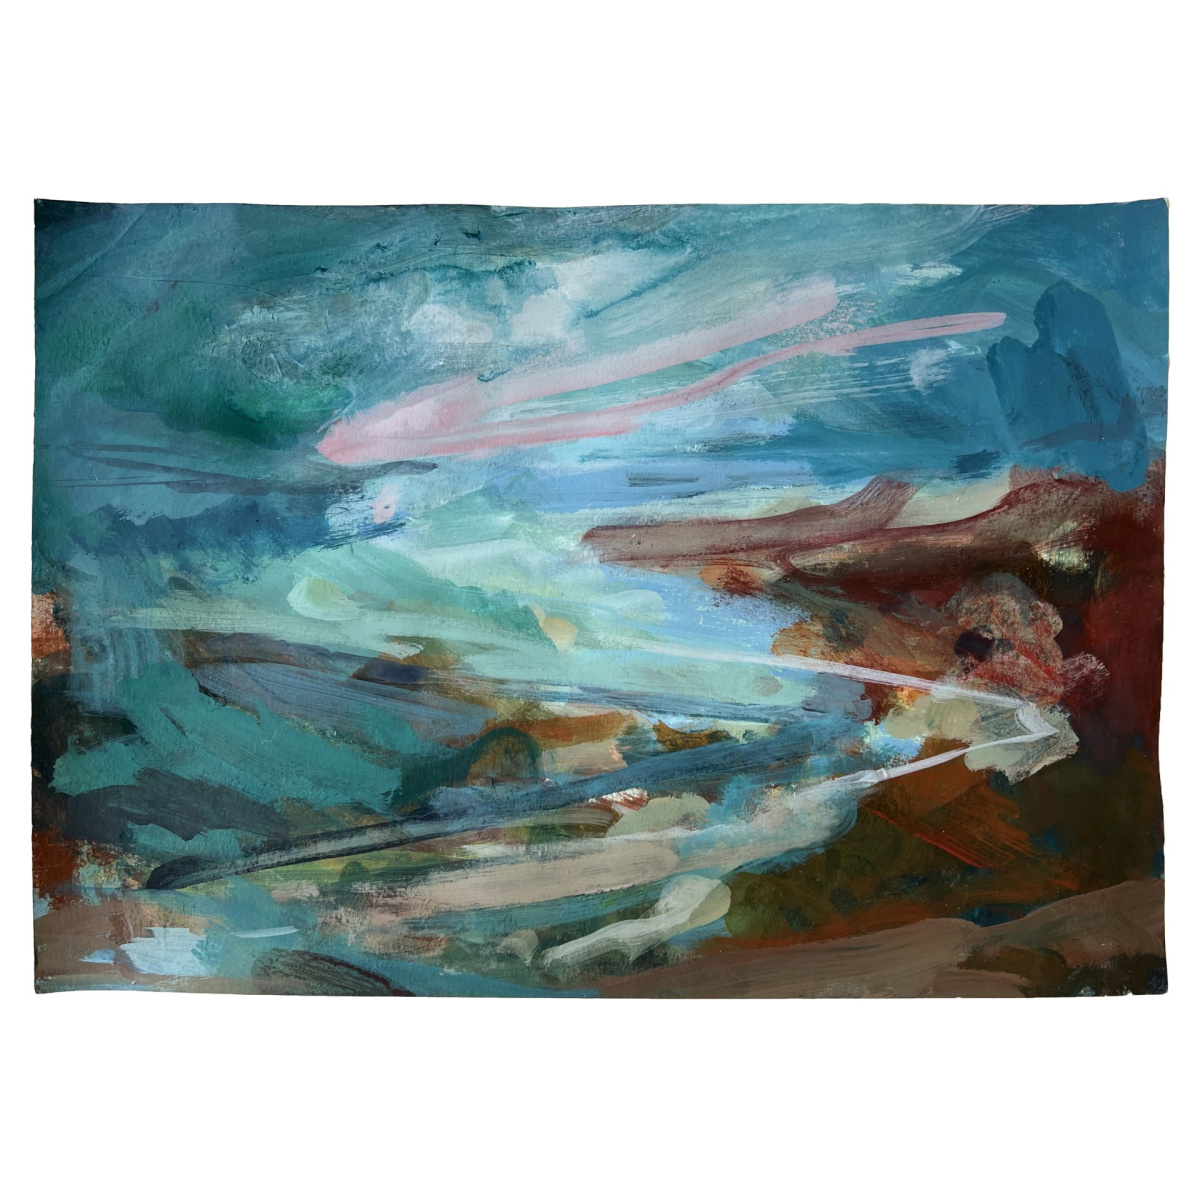 'shades and rocky falls’ colour study